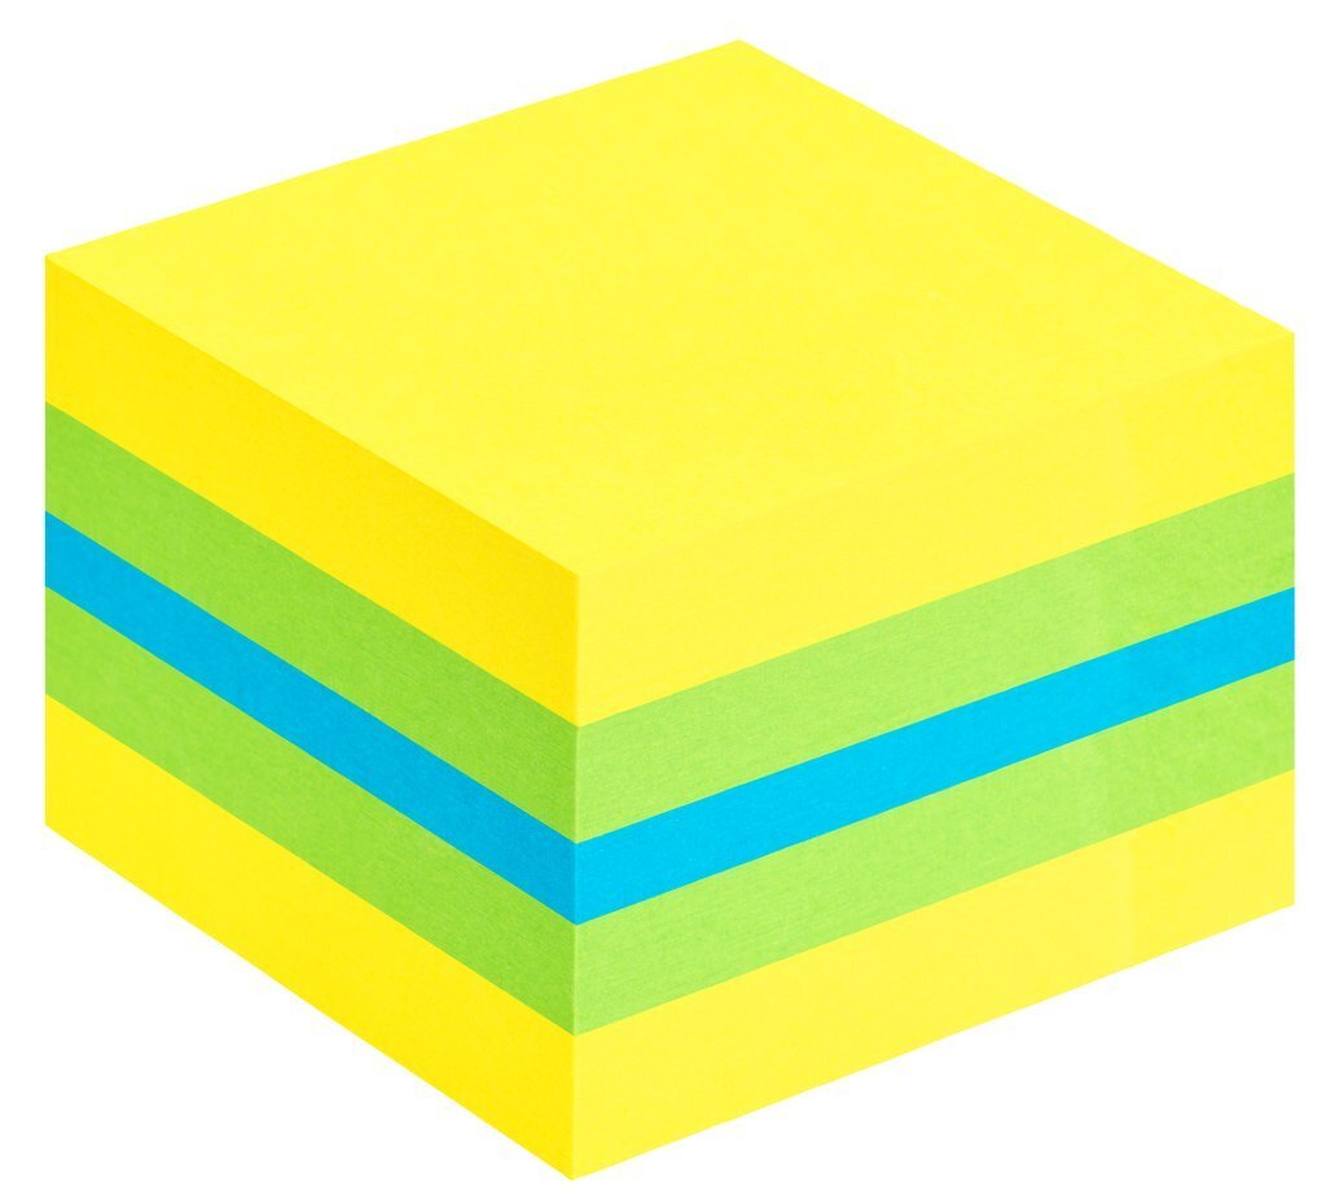 3M Post-it Mini cube 2051-L, 51 mm x 51 mm, blue, lime green, lemon yellow, 1 cube with 400 sheets each